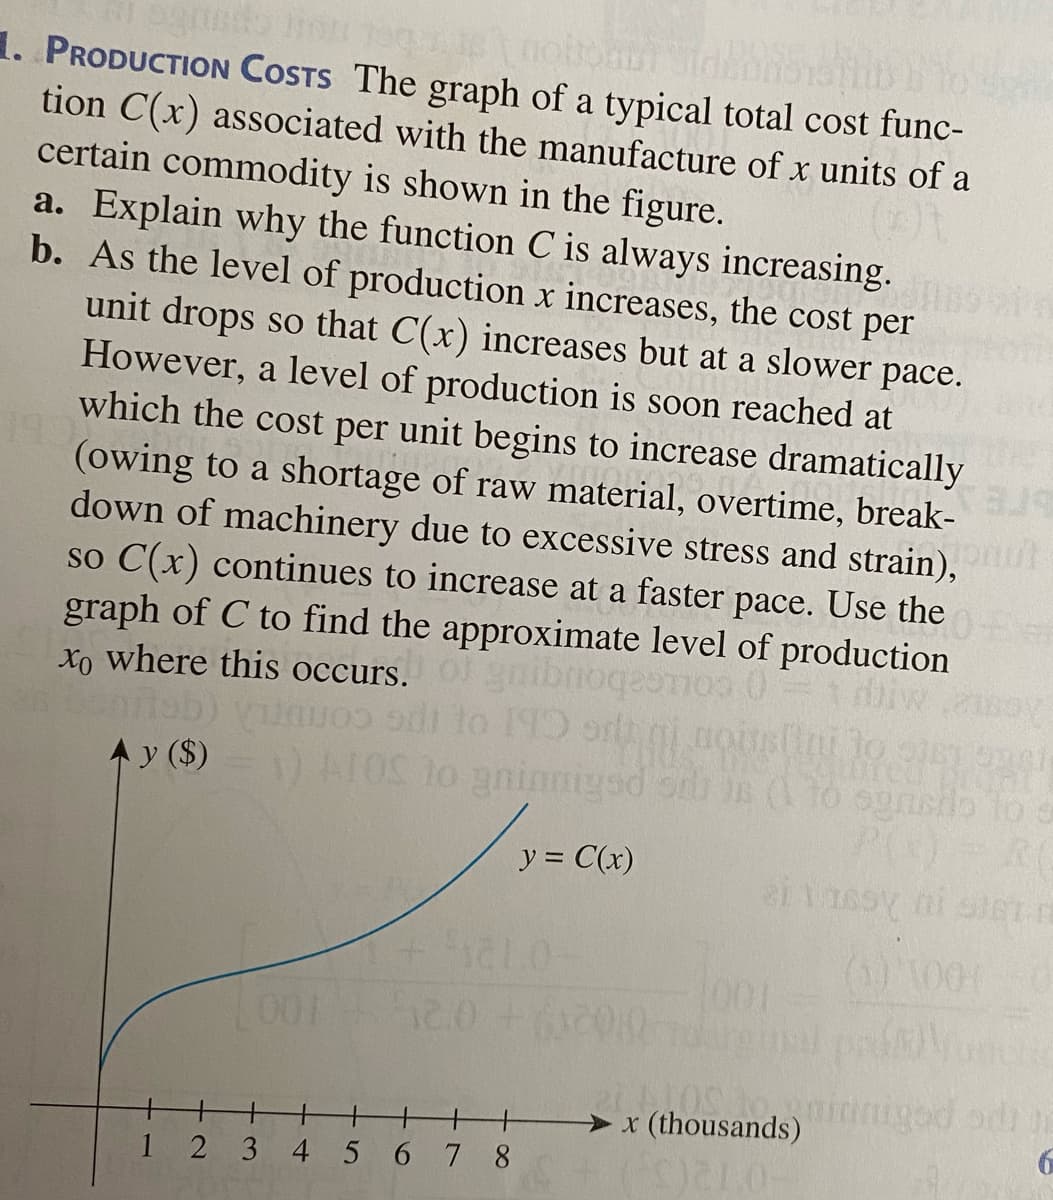 1. PRODUCTION COSTS The graph of a typical total cost func-
tion C(x) associated with the manufacture of x units of a
certain commodity is shown in the figure.
a. Explain why the function C is always increasing.
b. As the level of production x increases, the cost per
unit drops so that C(x) increases but at a slower pace.
However, a level of production is soon reached at
which the cost per unit begins to increase dramatically
(owing to a shortage of raw material, overtime, break-
down of machinery due to excessive stress and strain),
so C(x) continues to increase at a faster pace. Use the
graph of C to find the approximate level of production
Xo where this occurs.
gnibnog
gesnos
to 190 orh gi nousini to i
conUTL
A y ($)
y = C(x)
(1) 1001
101
001
RO nidniged od e
> x (thousands)
1
2 3 4 5 67 8
